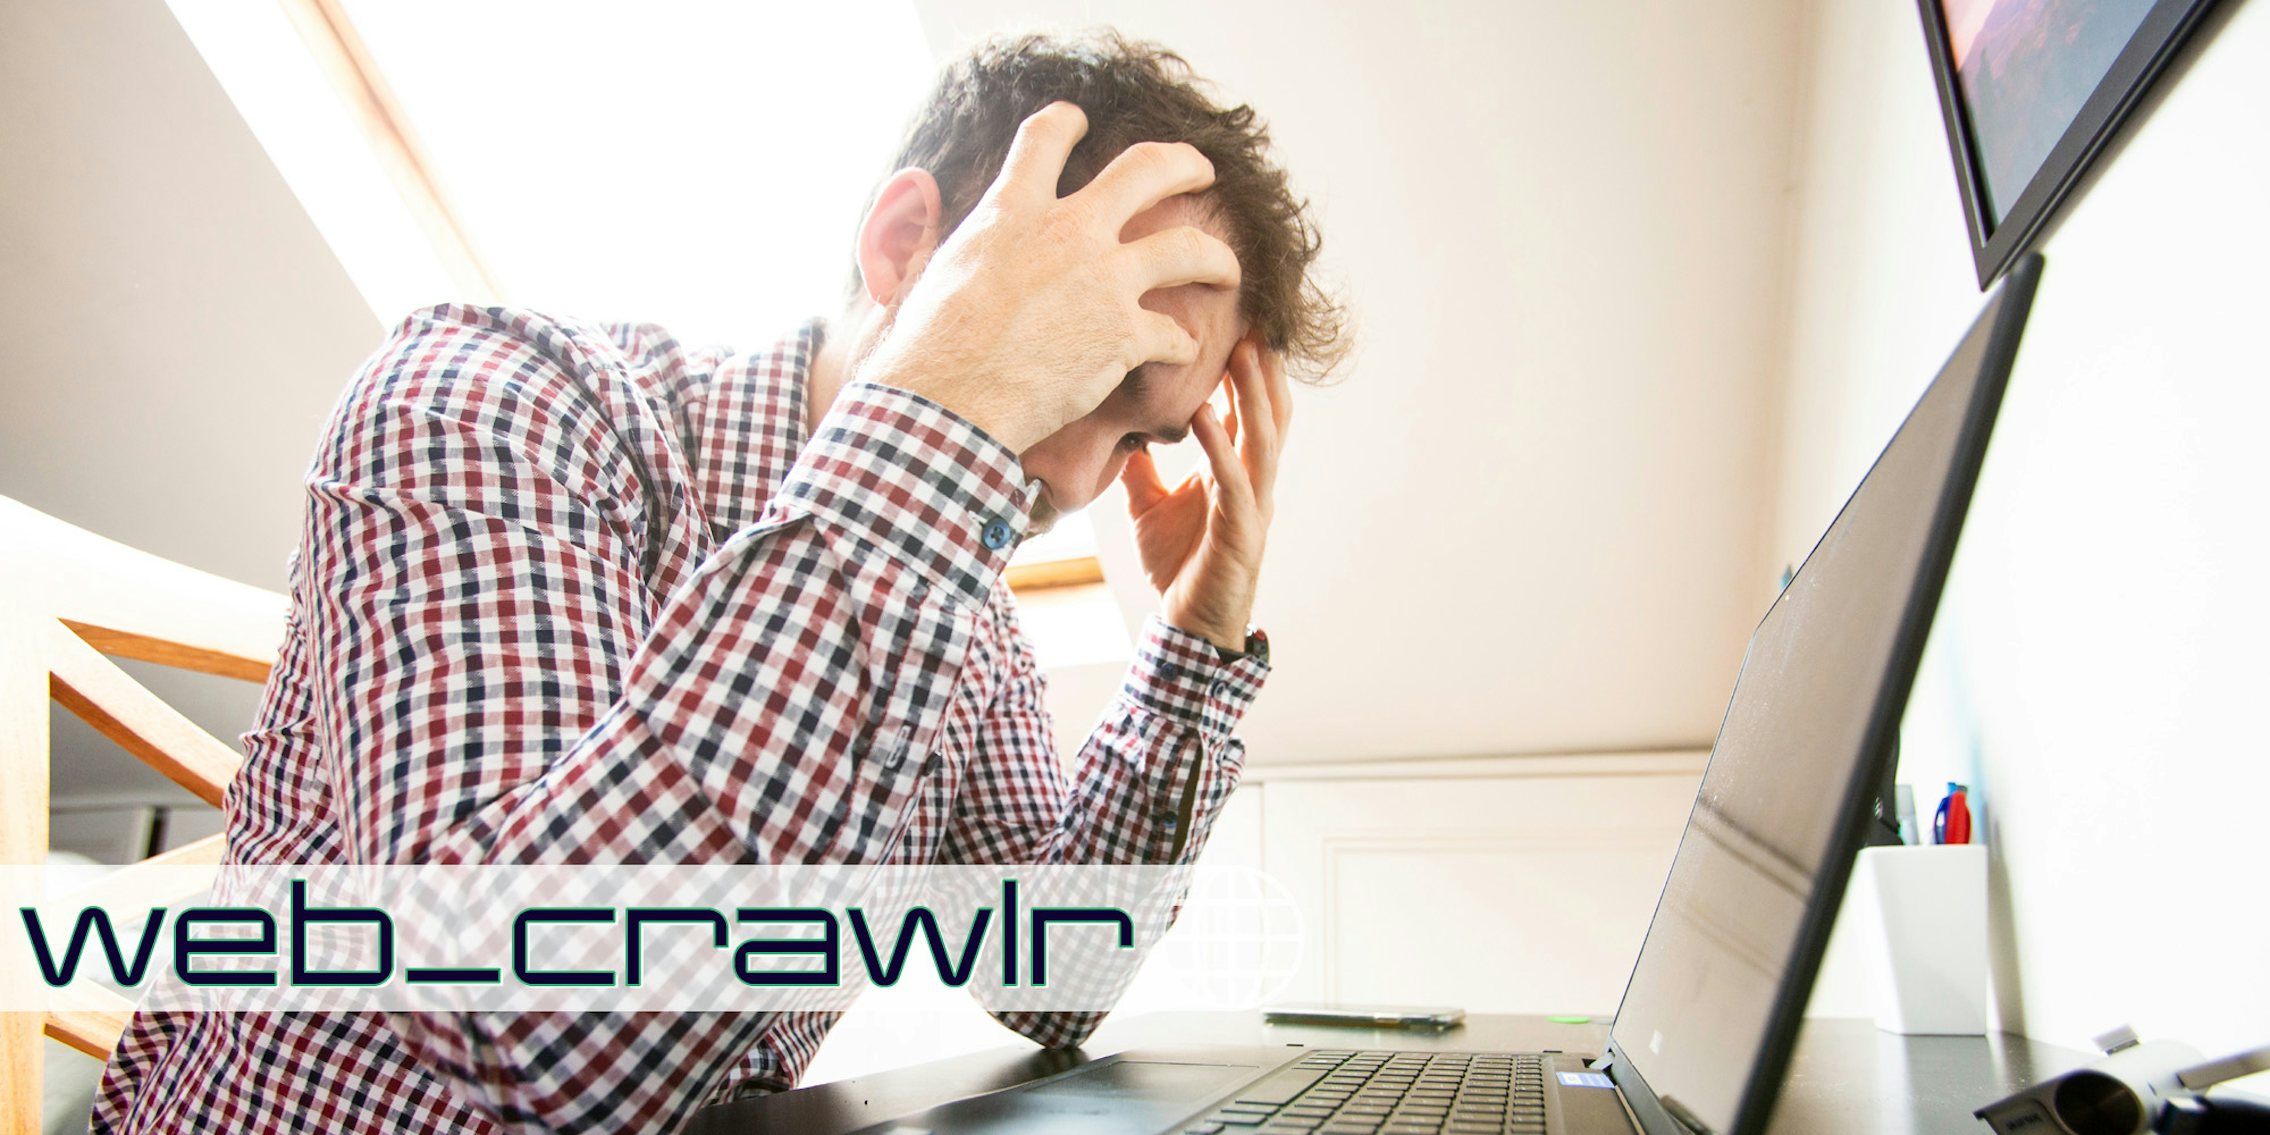 A person looking frustrated in front of a laptop. The Daily Dot newsletter web_crawlr logo is in the bottom left corner.